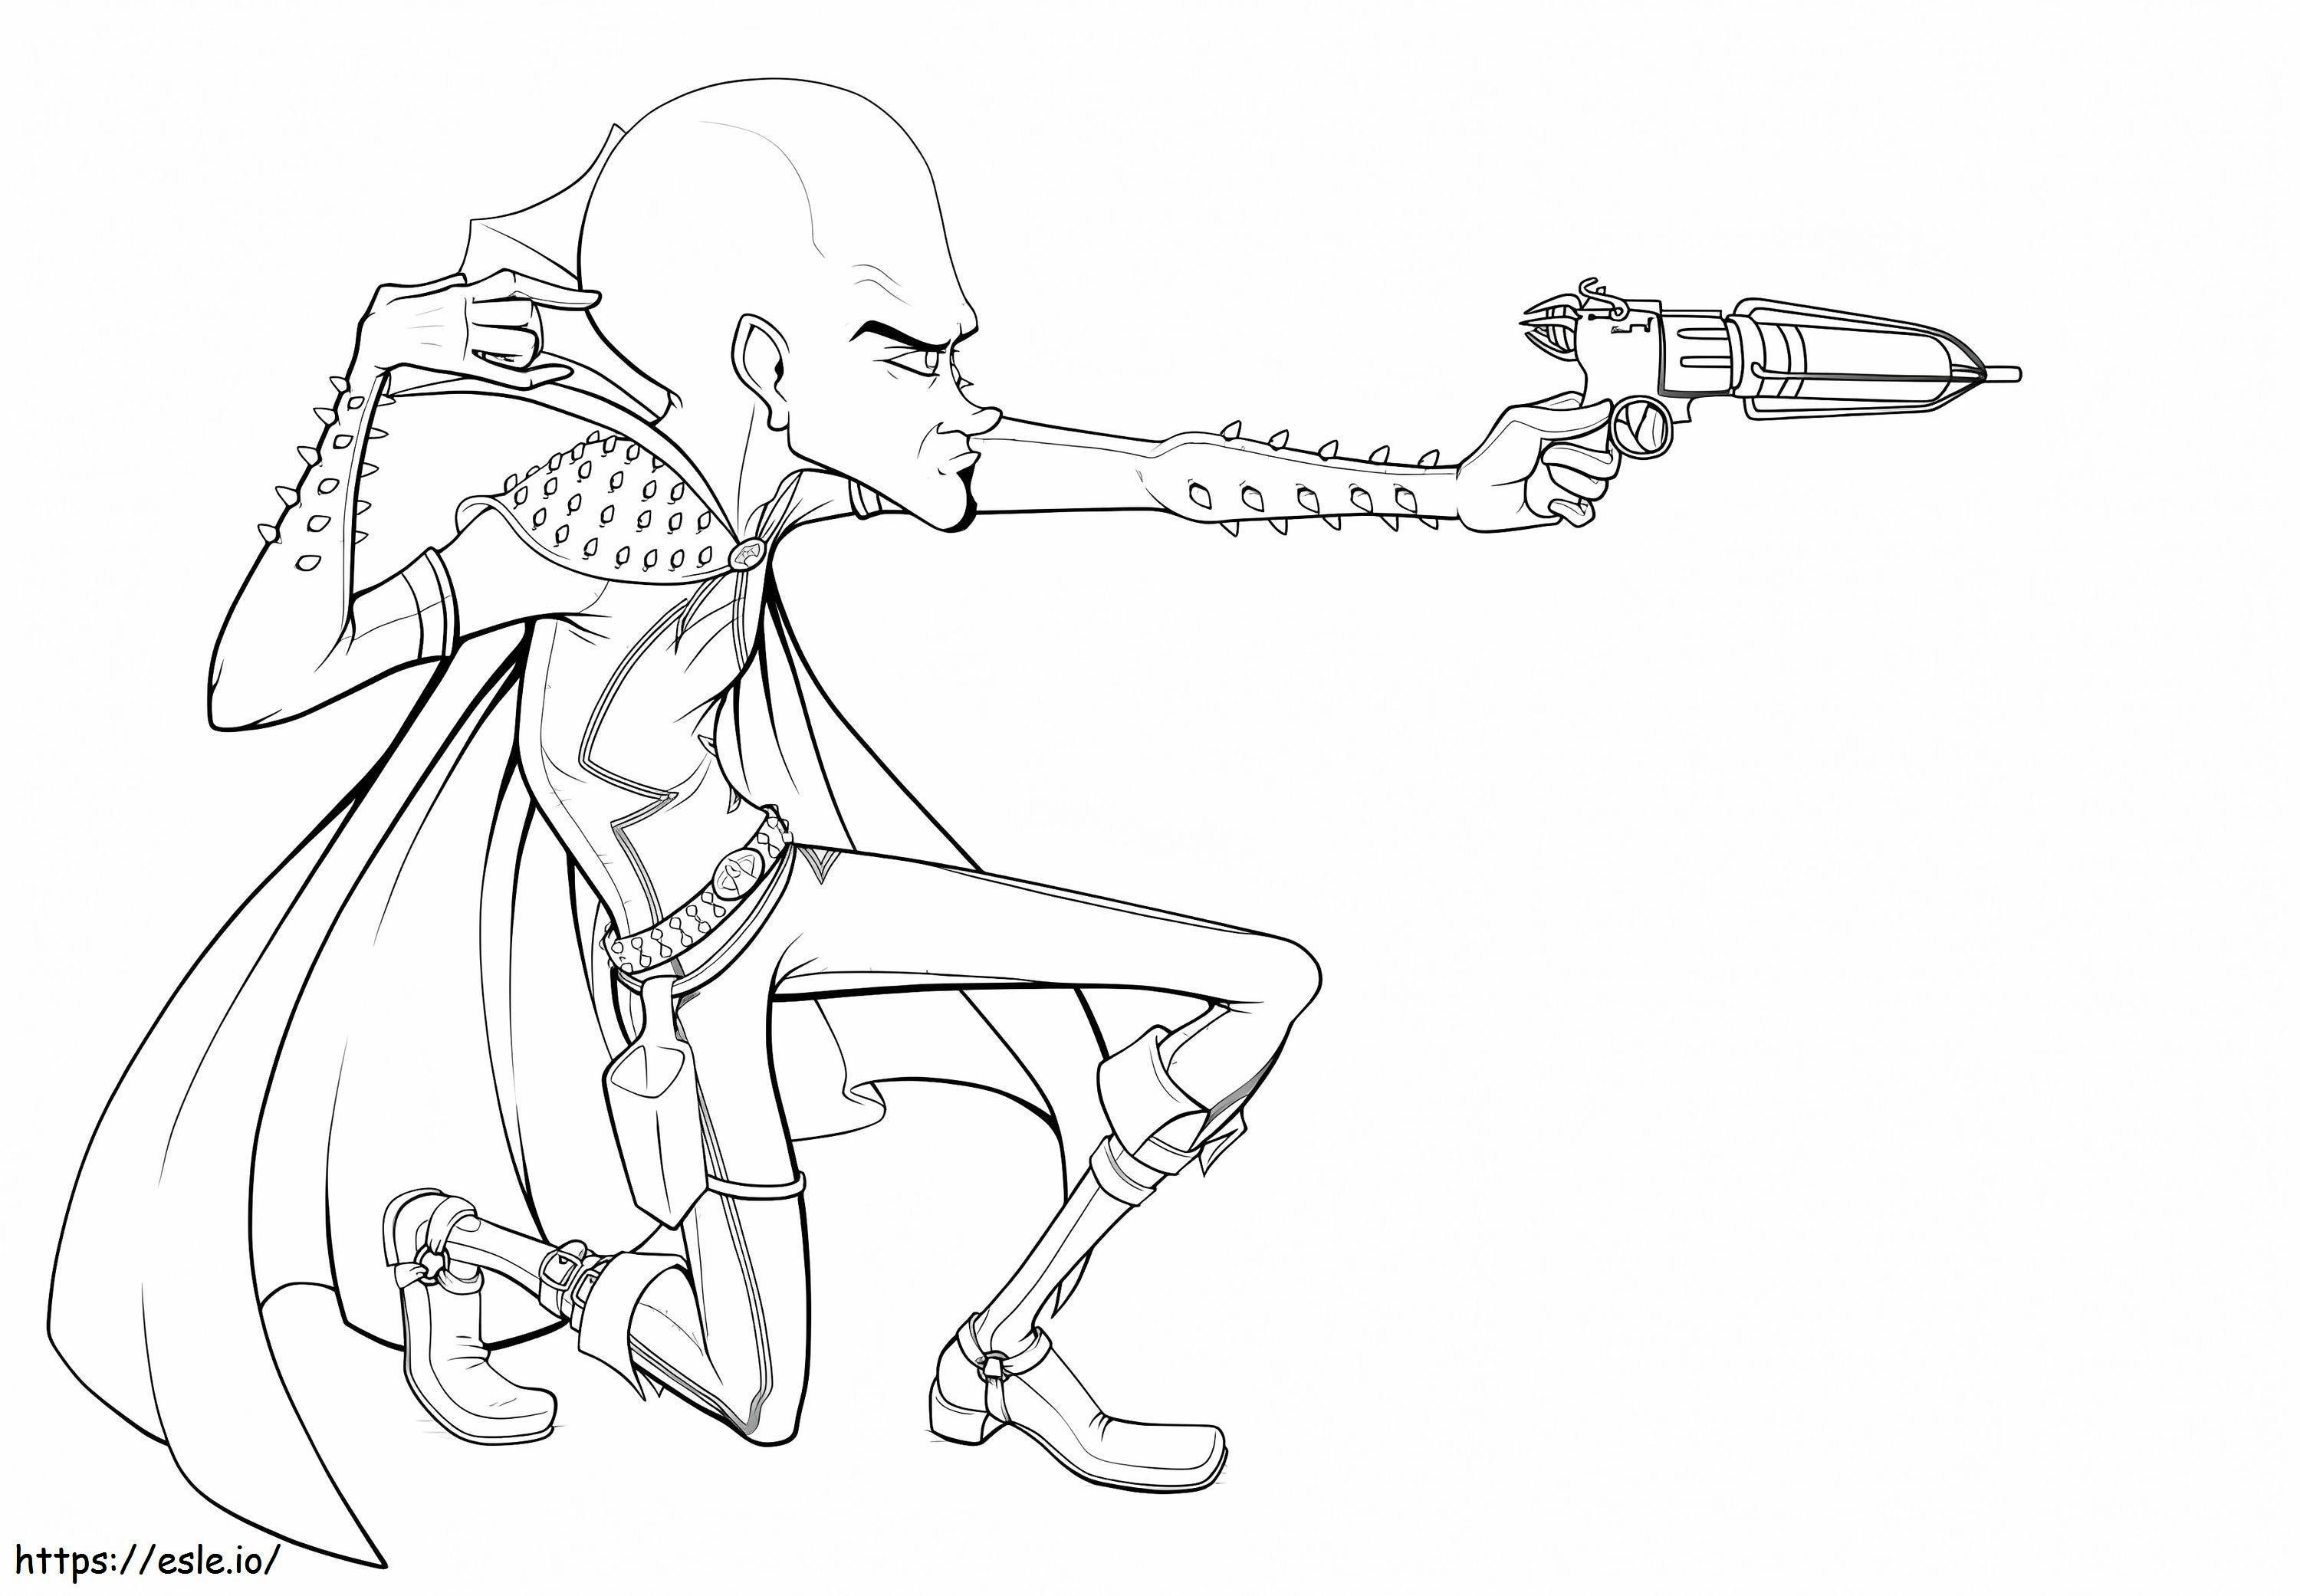 Megamind Shooting coloring page